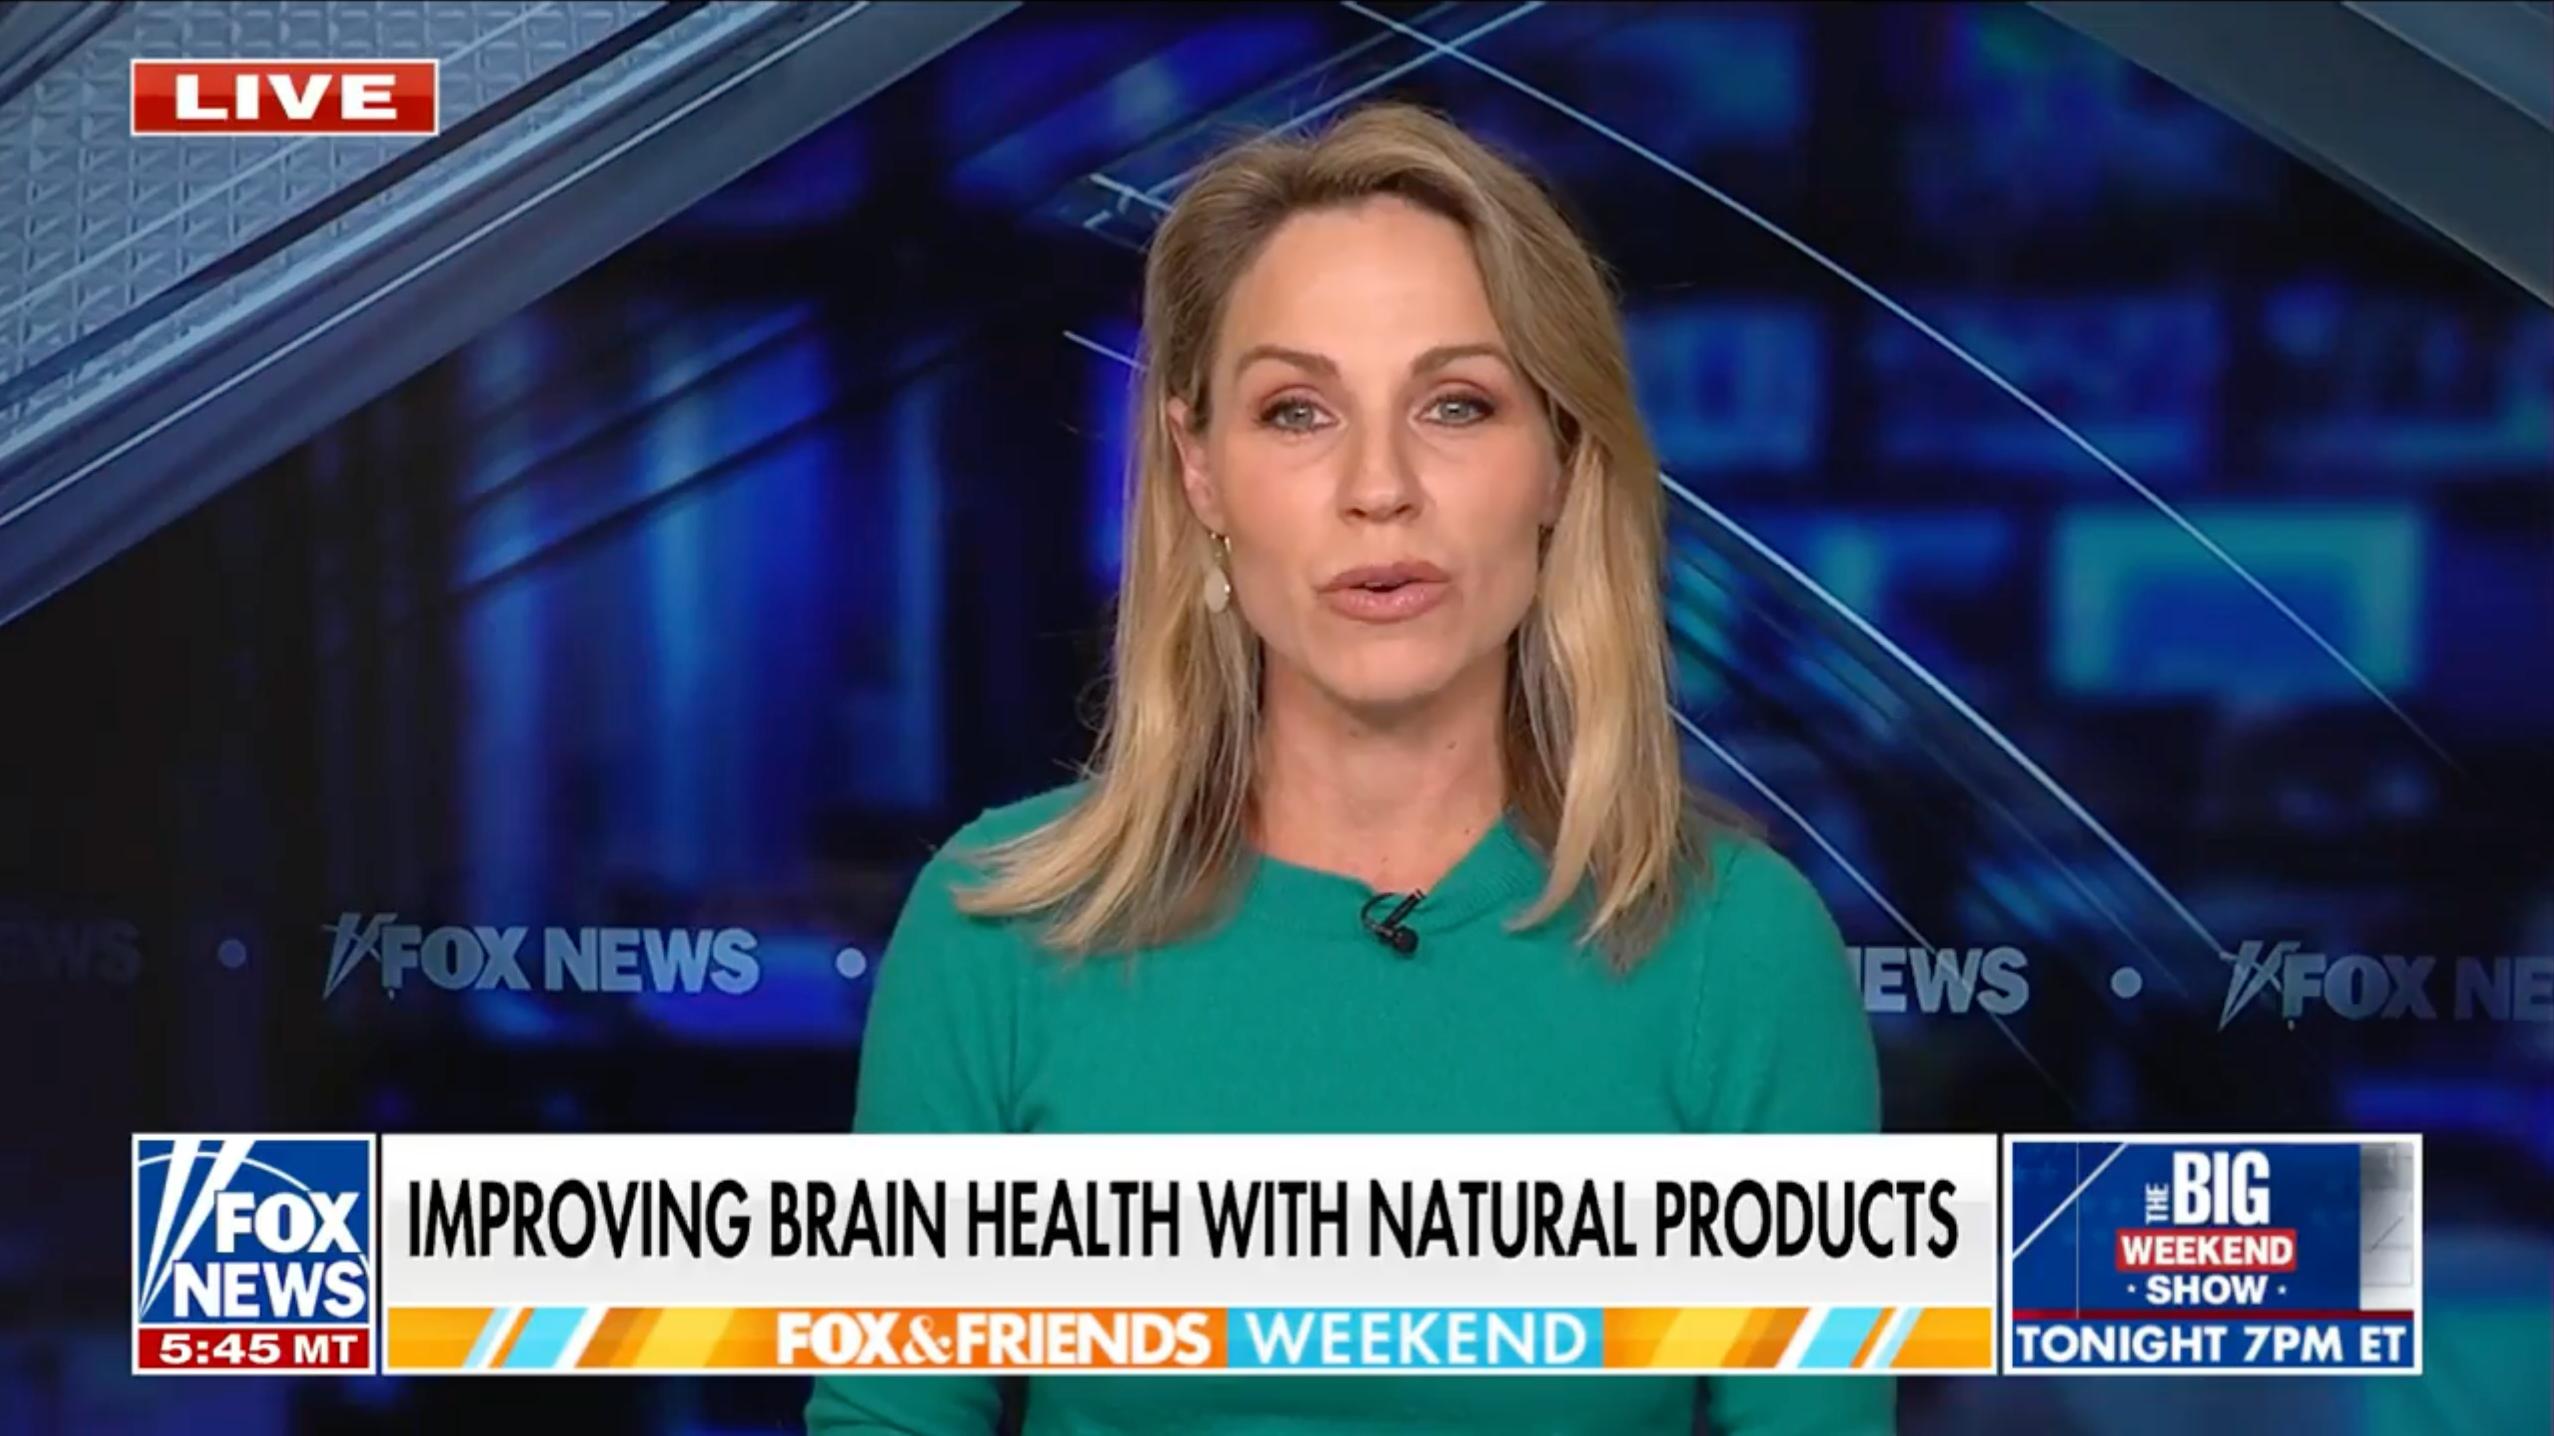 Amid post-debate cognitive concerns, doctor recommends 3 natural supplements [Video]